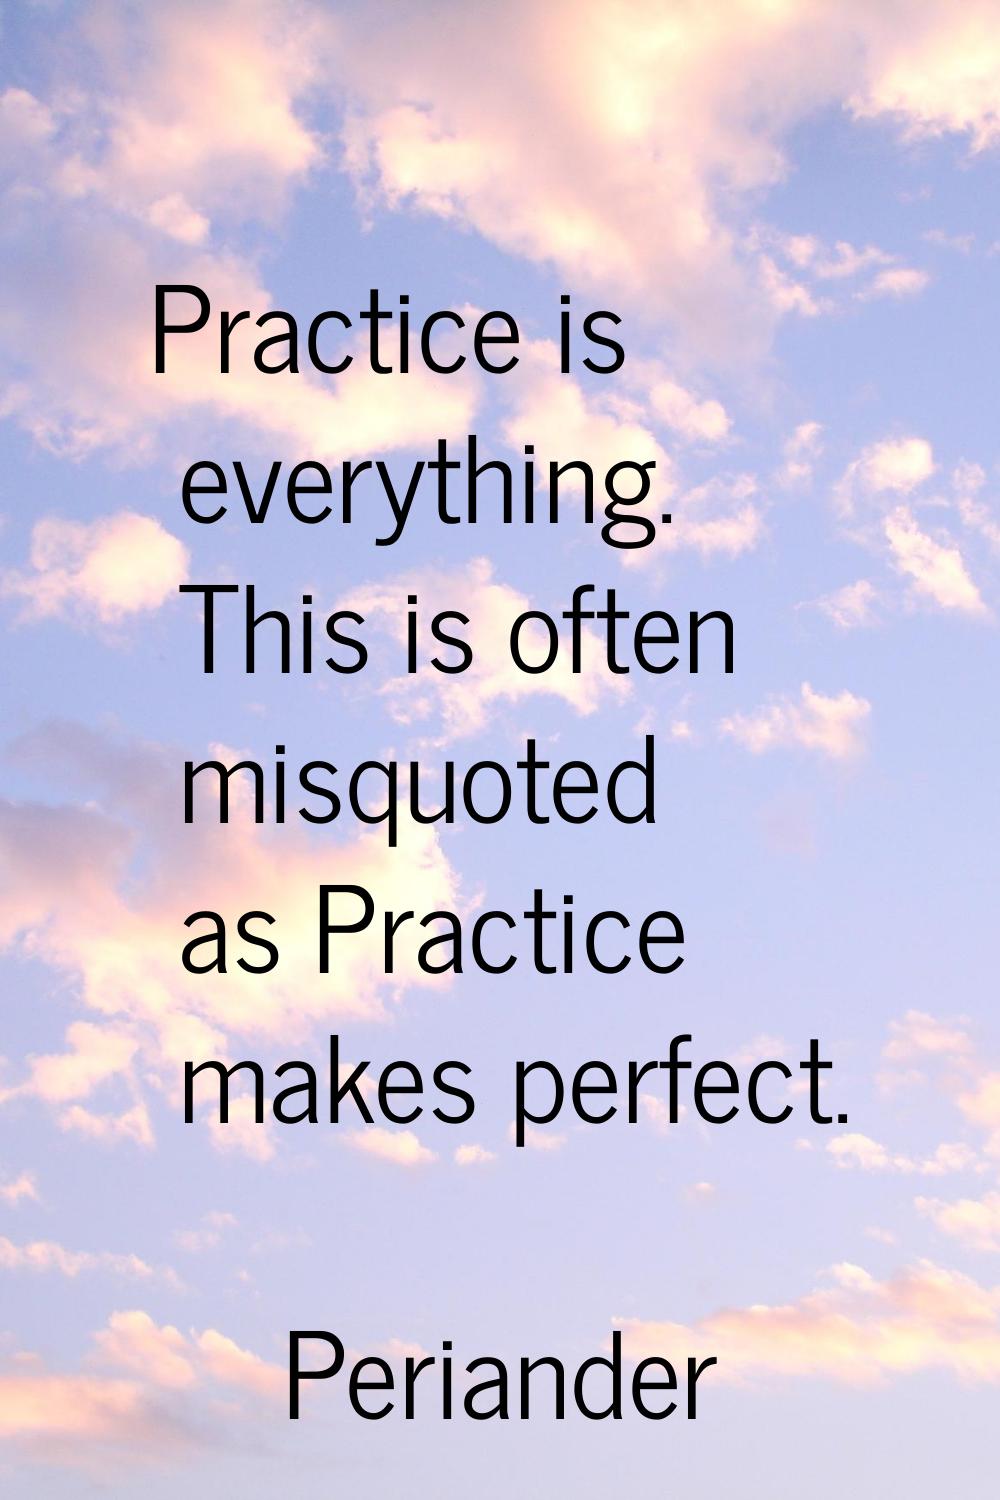 Practice is everything. This is often misquoted as Practice makes perfect.